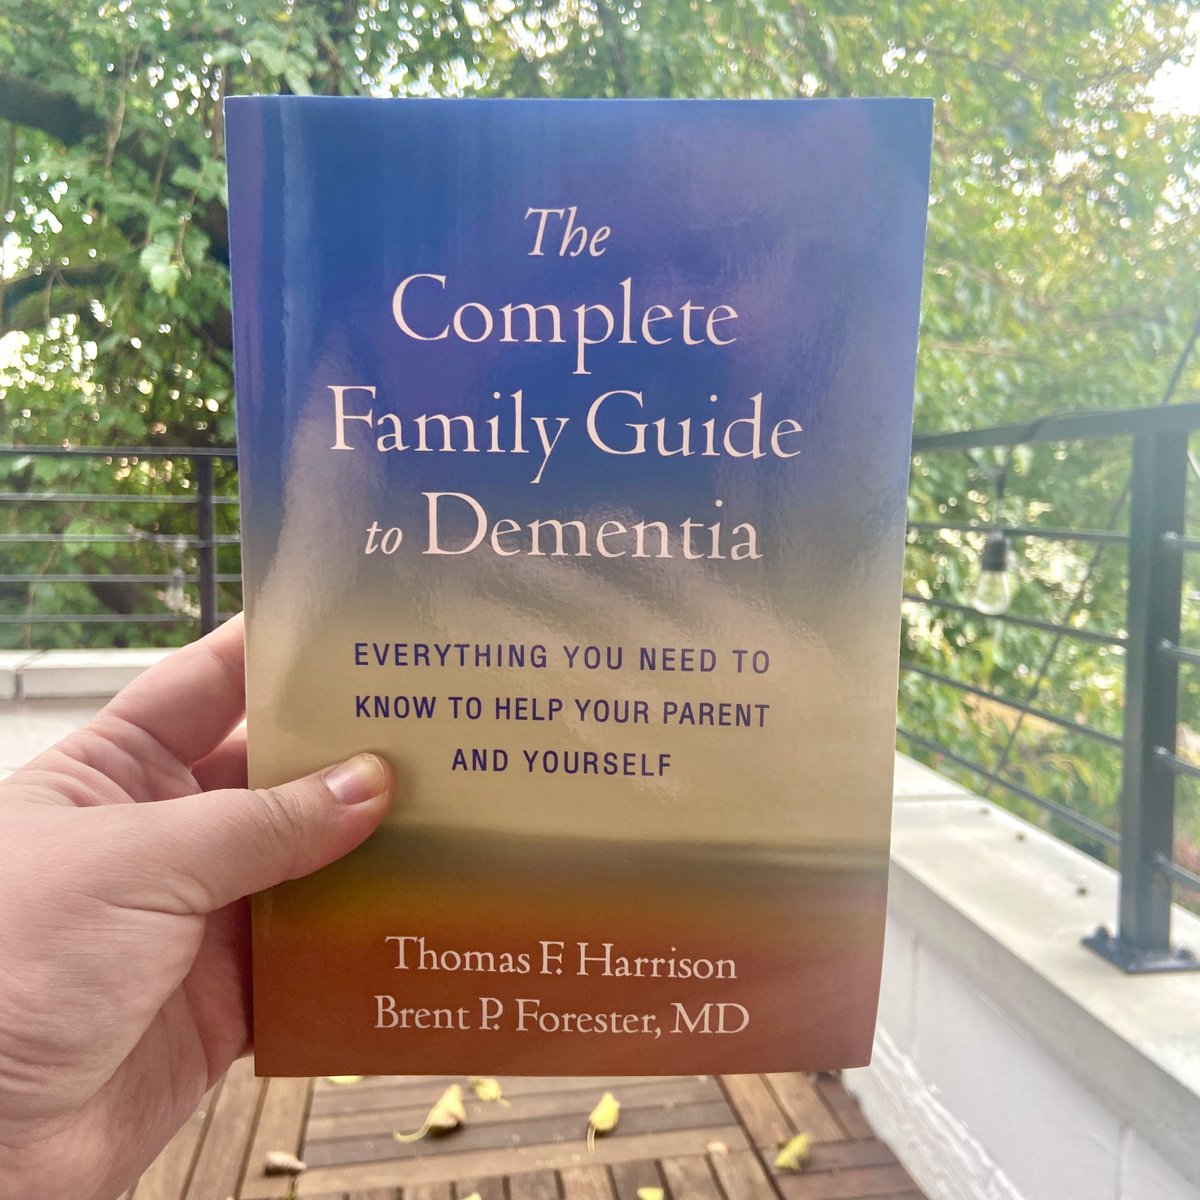 November is National Alzheimer's Awareness Month. Interested in learning more about dementia and how it differs from simply getting older? Check out this free sample chapter from Thomas Harrison and @BrentForester's 'The Complete Family Guide to Dementia': bit.ly/3Qkhuq4